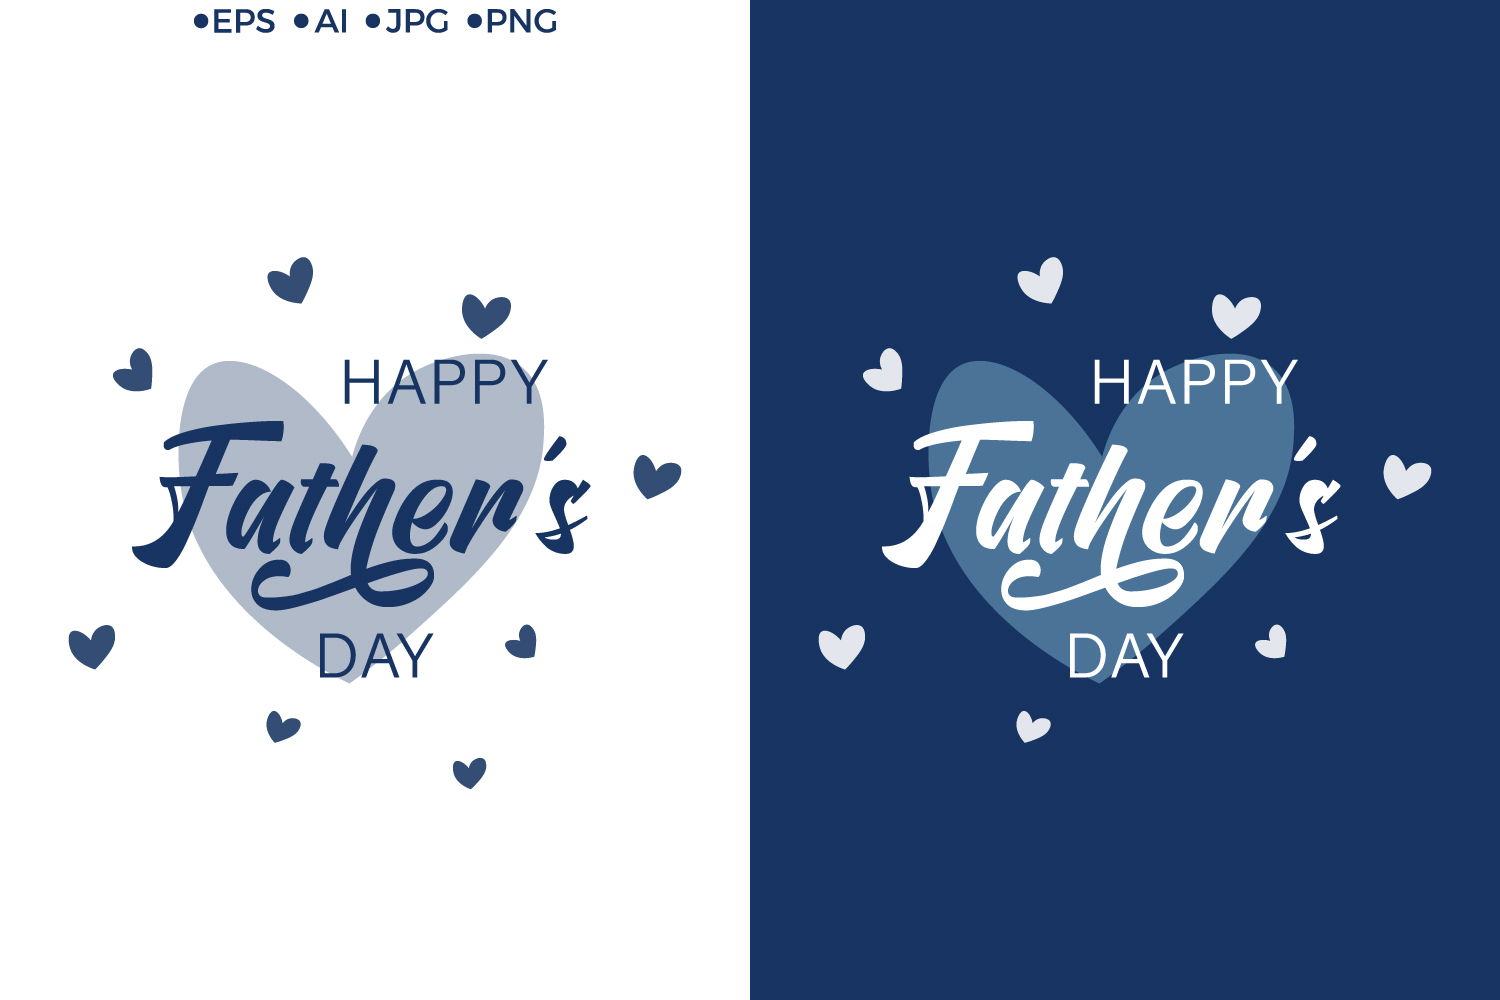 Happy Father's day design